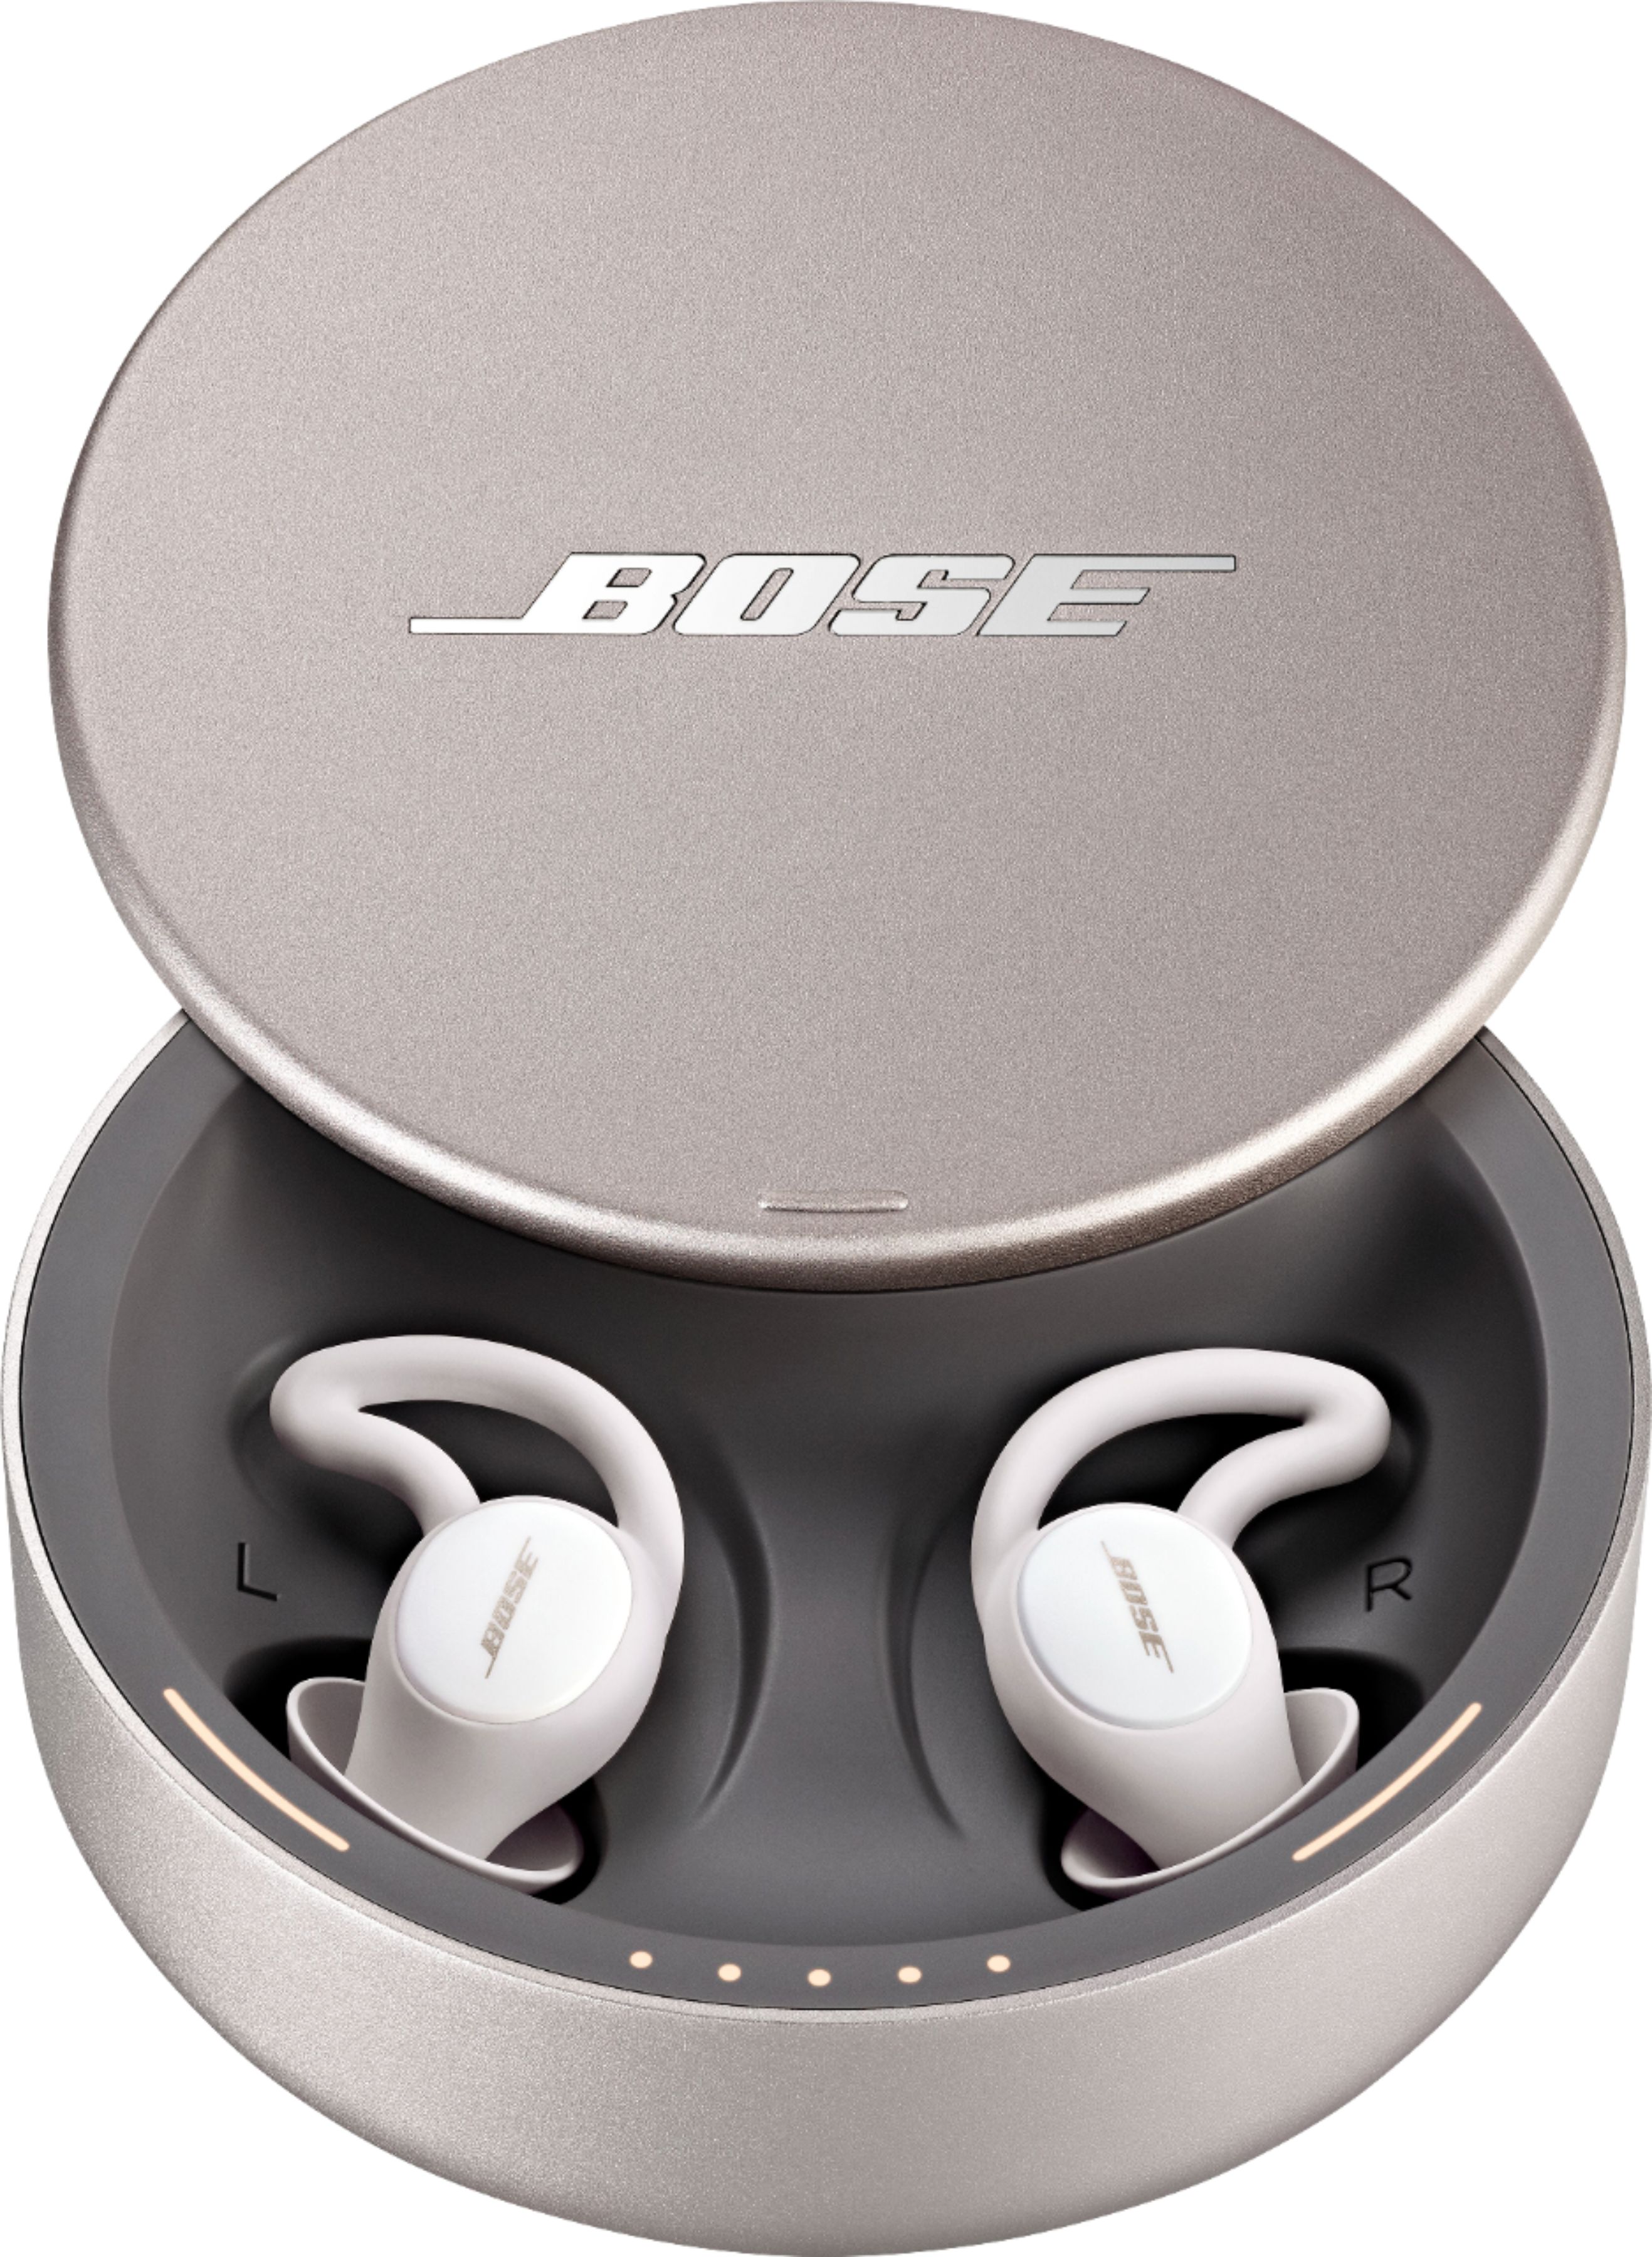 Bose Sleepbuds II — Soothing Sounds and Noise-masking Technology Designed for Better Sleep White/Silver 841013-0010 - Best Buy